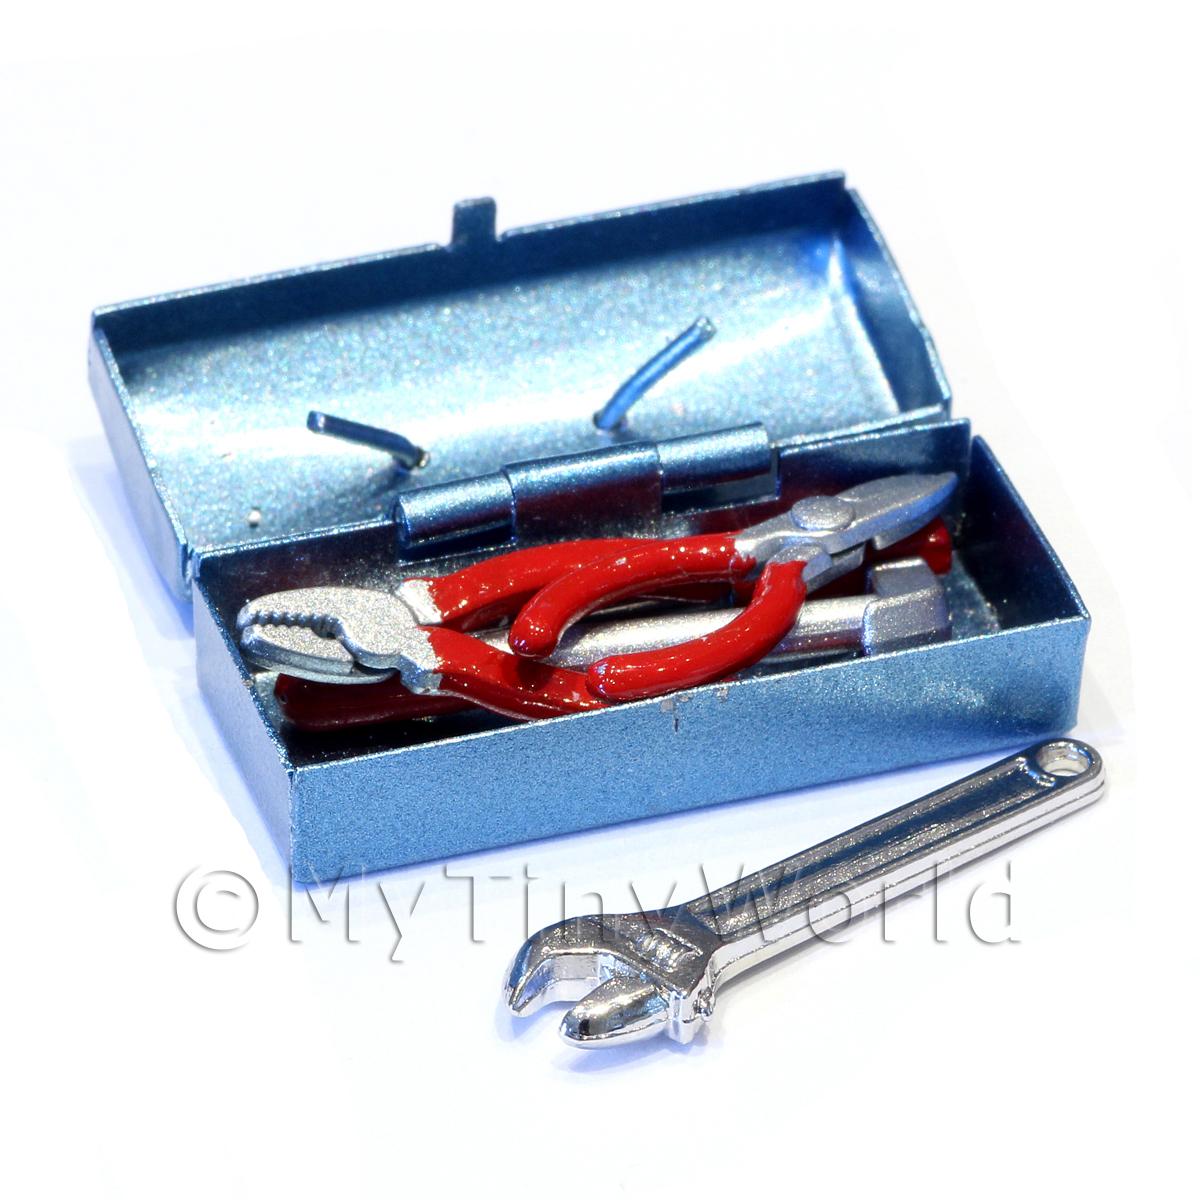 1/12 Scale Dolls House Miniatures  | Dolls House Miniature Blue Metallic Opening Toolbox And Tools